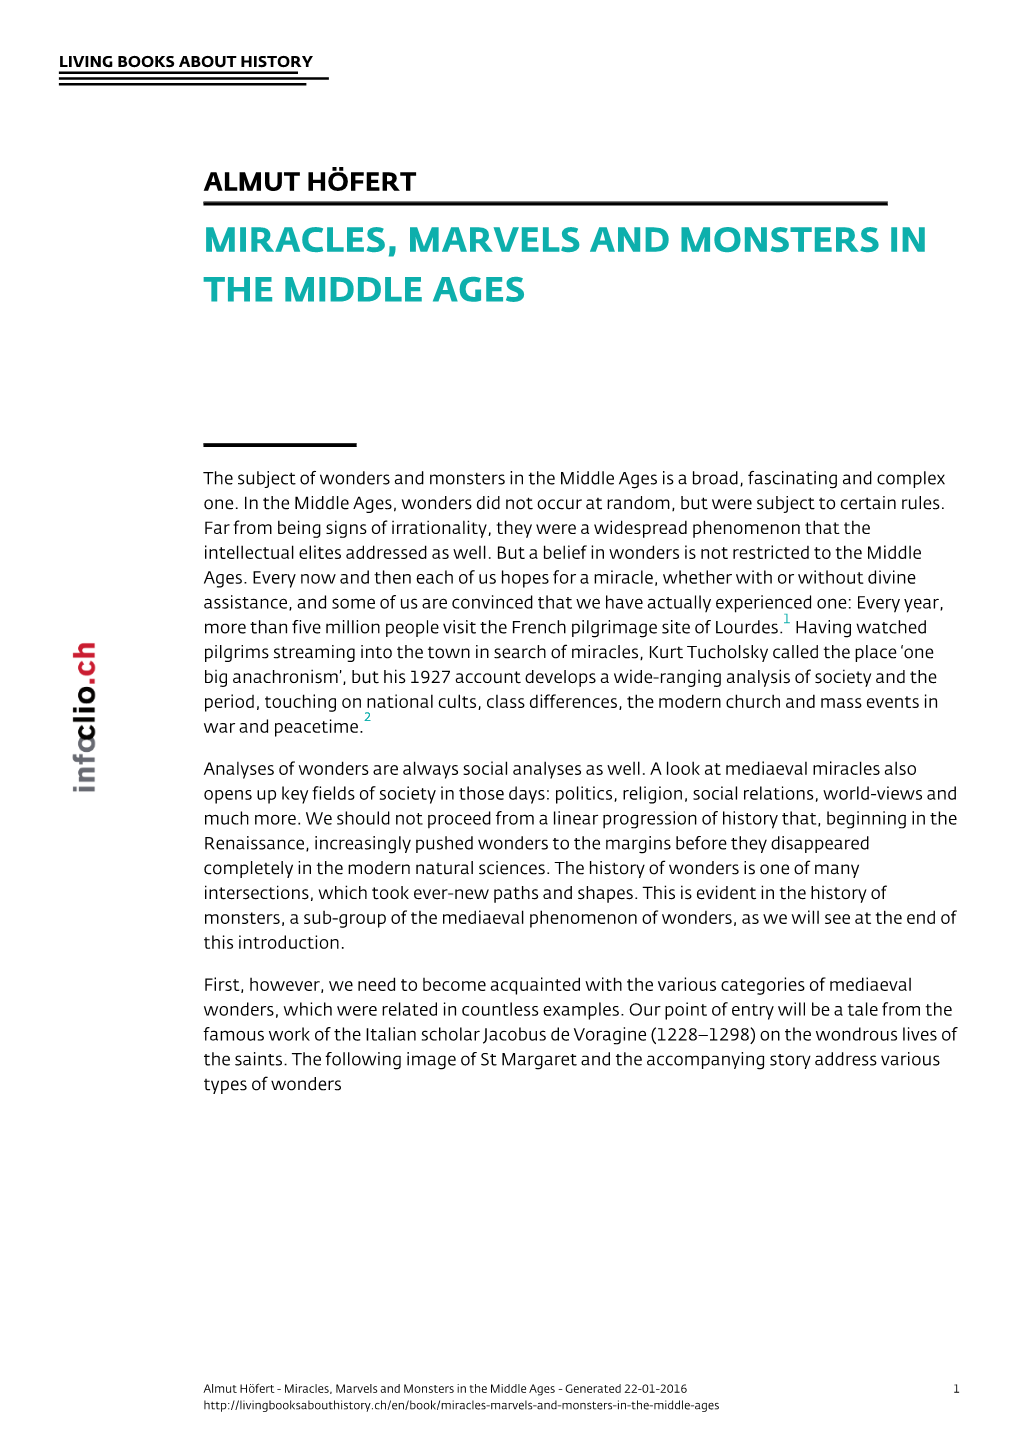 Miracles, Marvels and Monsters in the Middle Ages